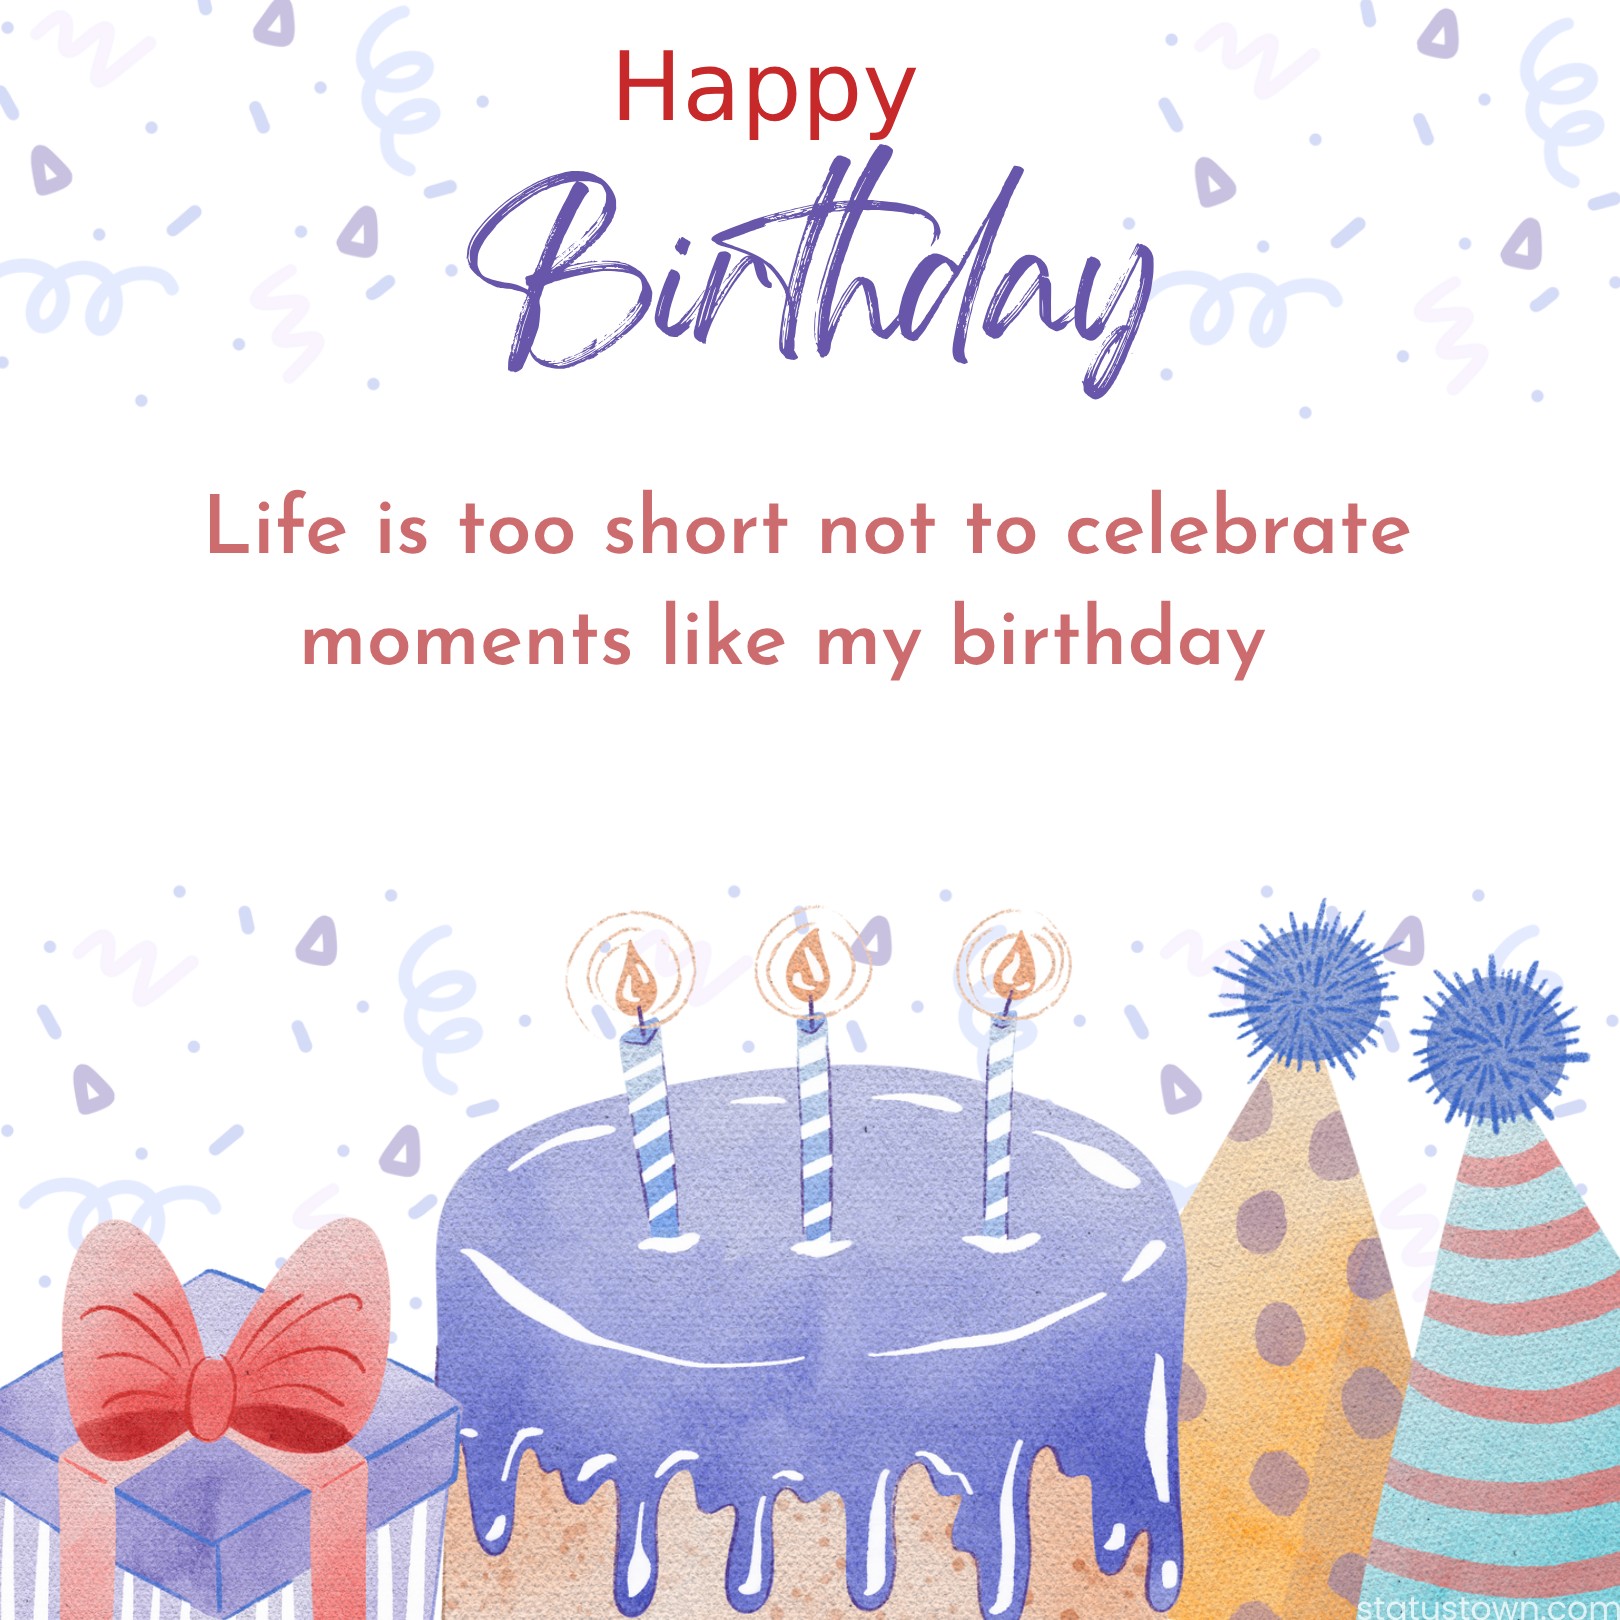 Life is too short not to celebrate moments like my birthday -  Birthday Wishes for Myself